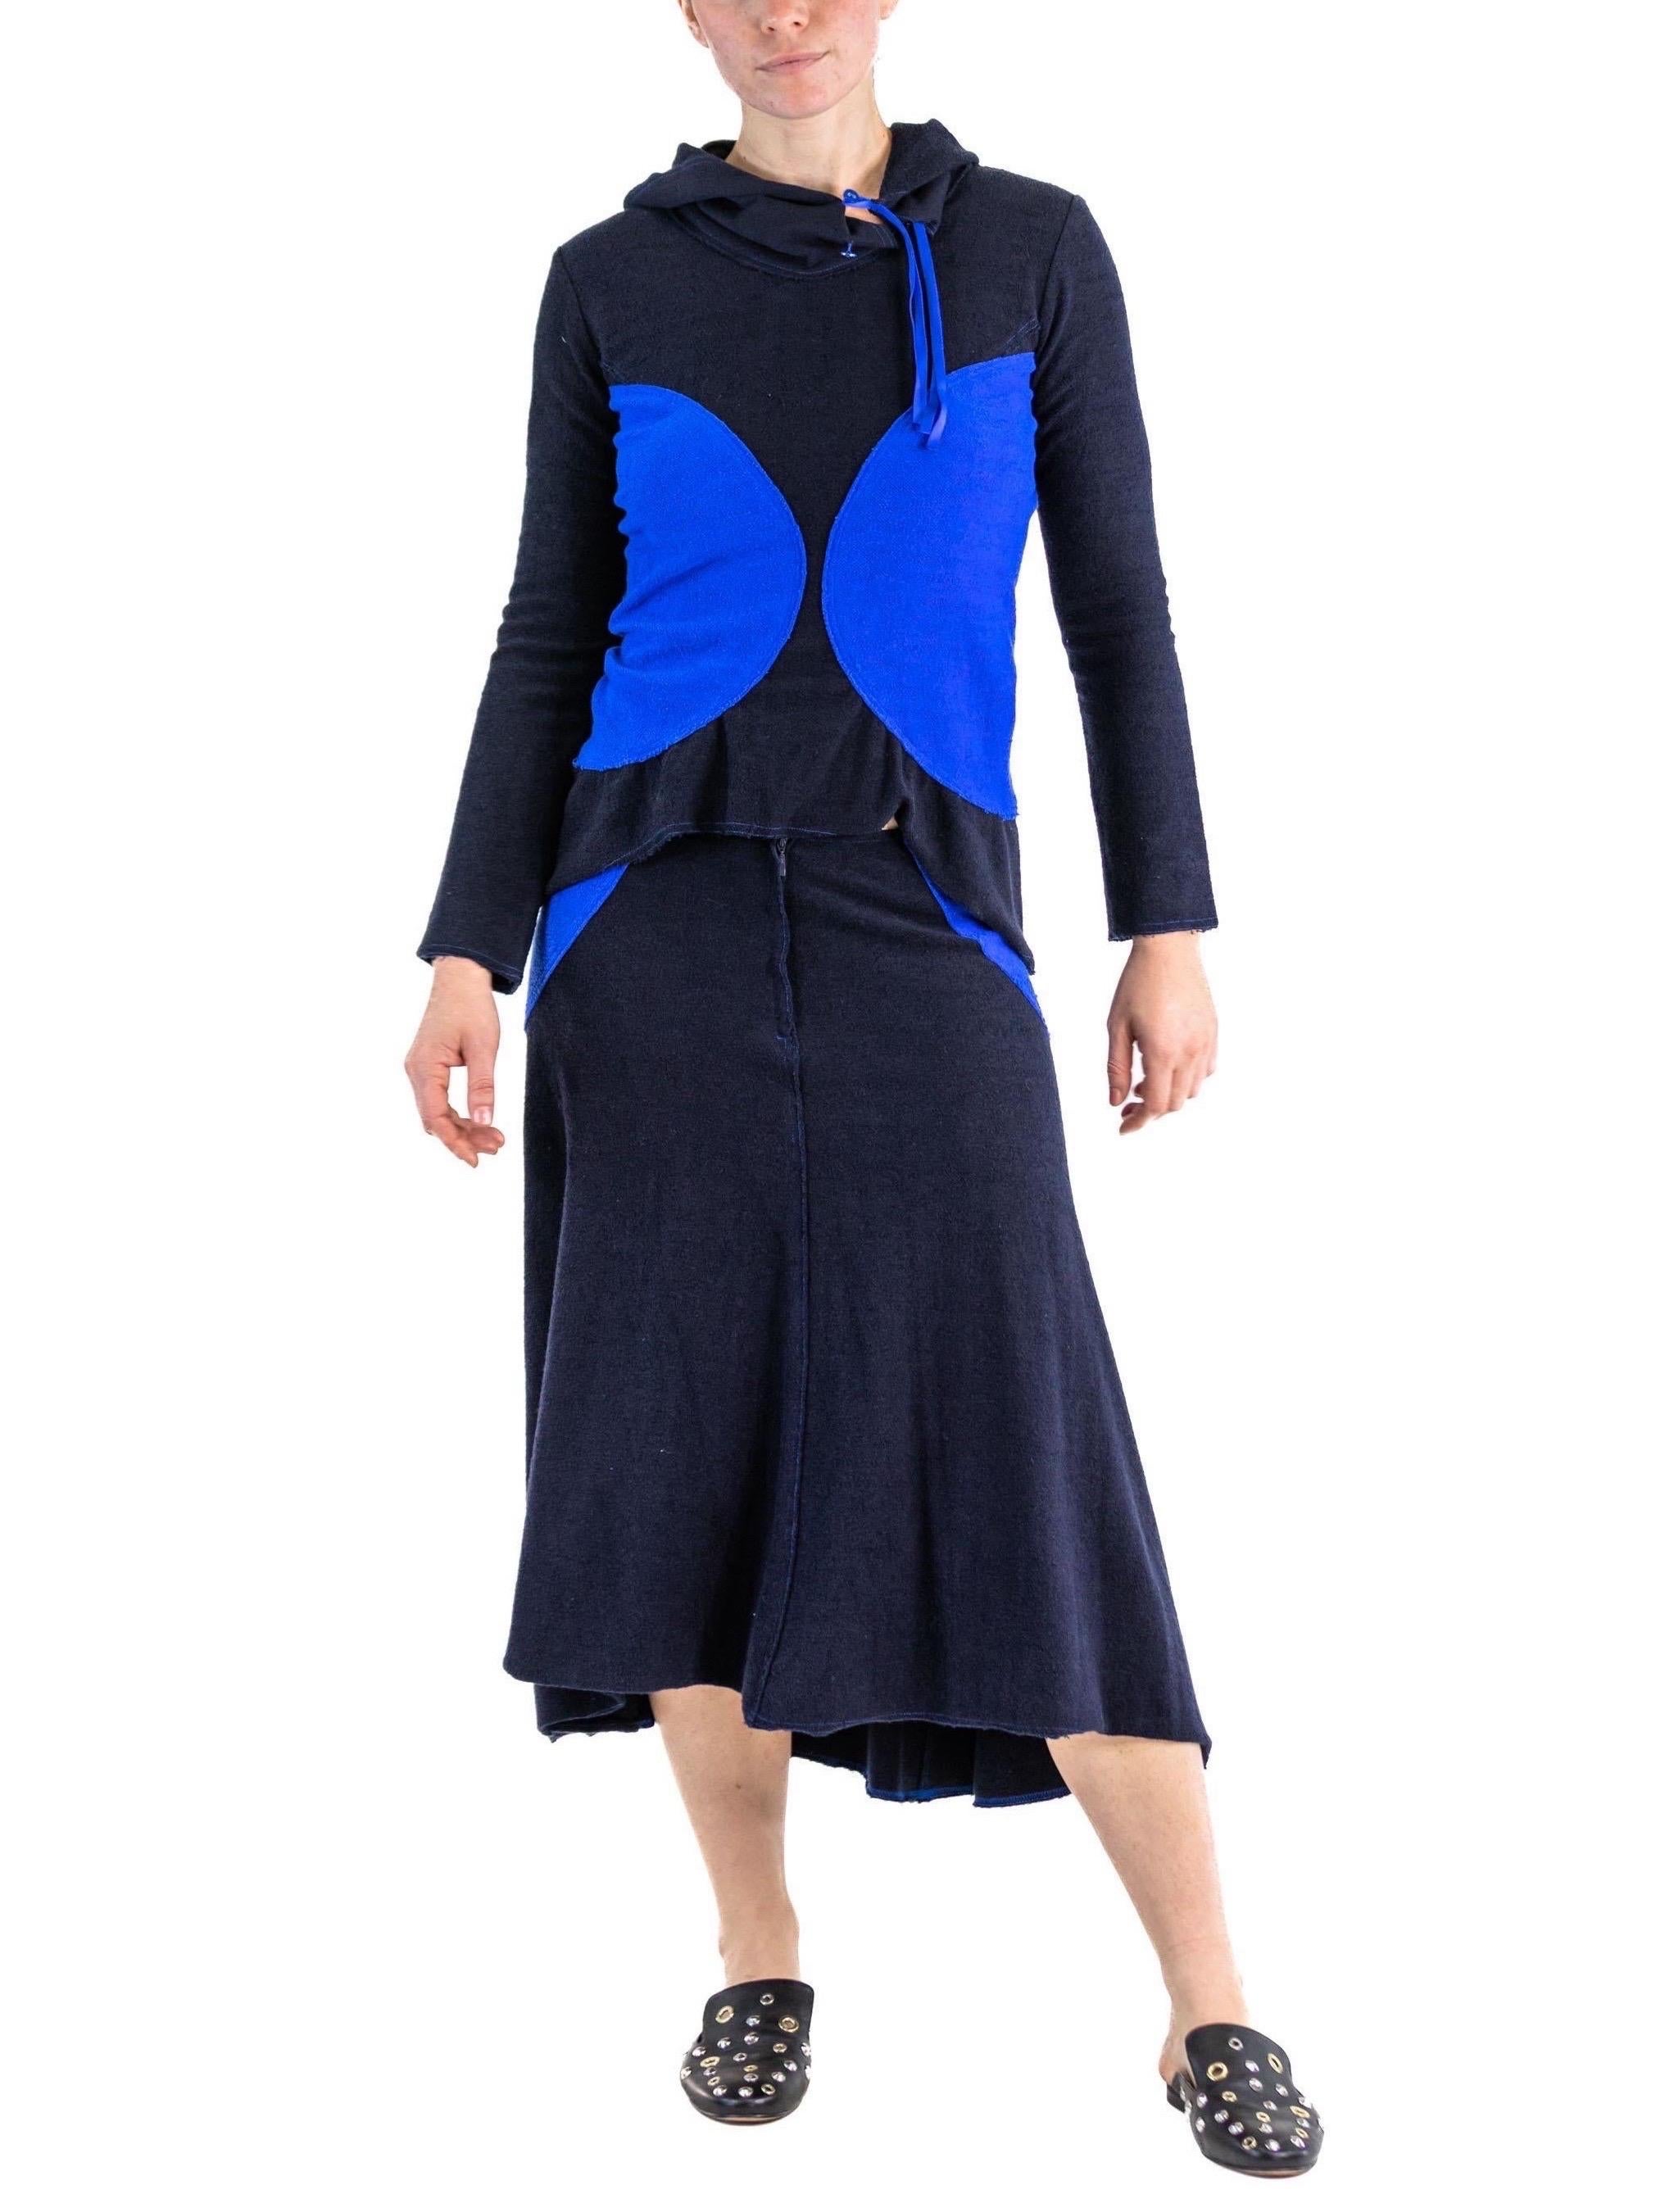 1990S ISSEY MIYAKE Cobalt Blue & Navy Cotton Terry  Colorblock Top Skirt Ensemb For Sale 4